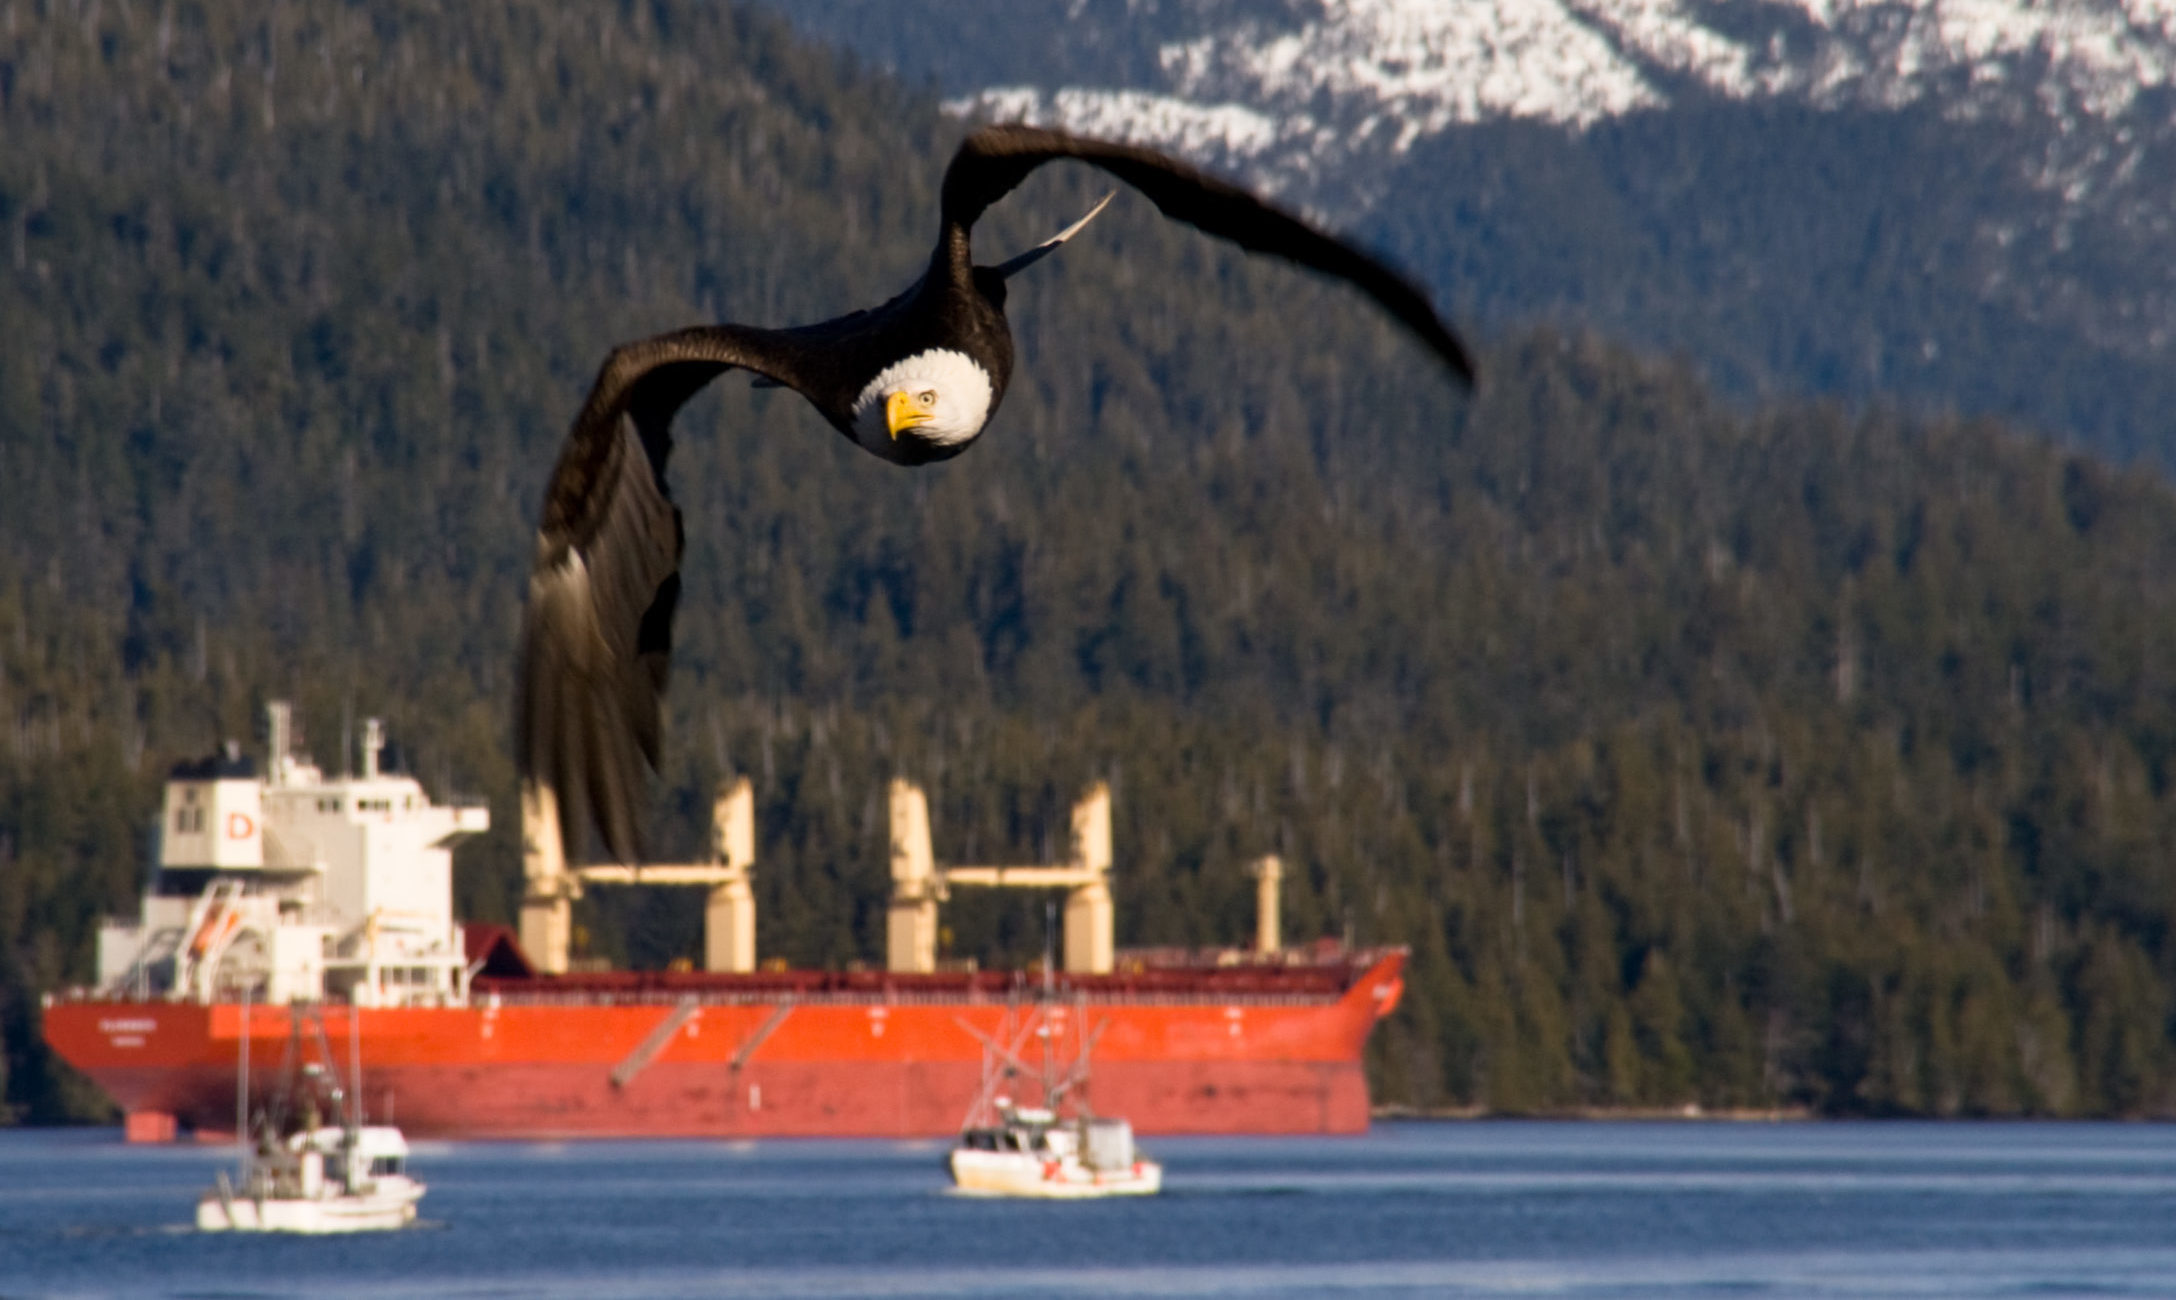 A Bald eagle (Haliaeetus leucocephalus) flying above a cargo ship and boats in Prince Rupert, British Columbia, Canada.